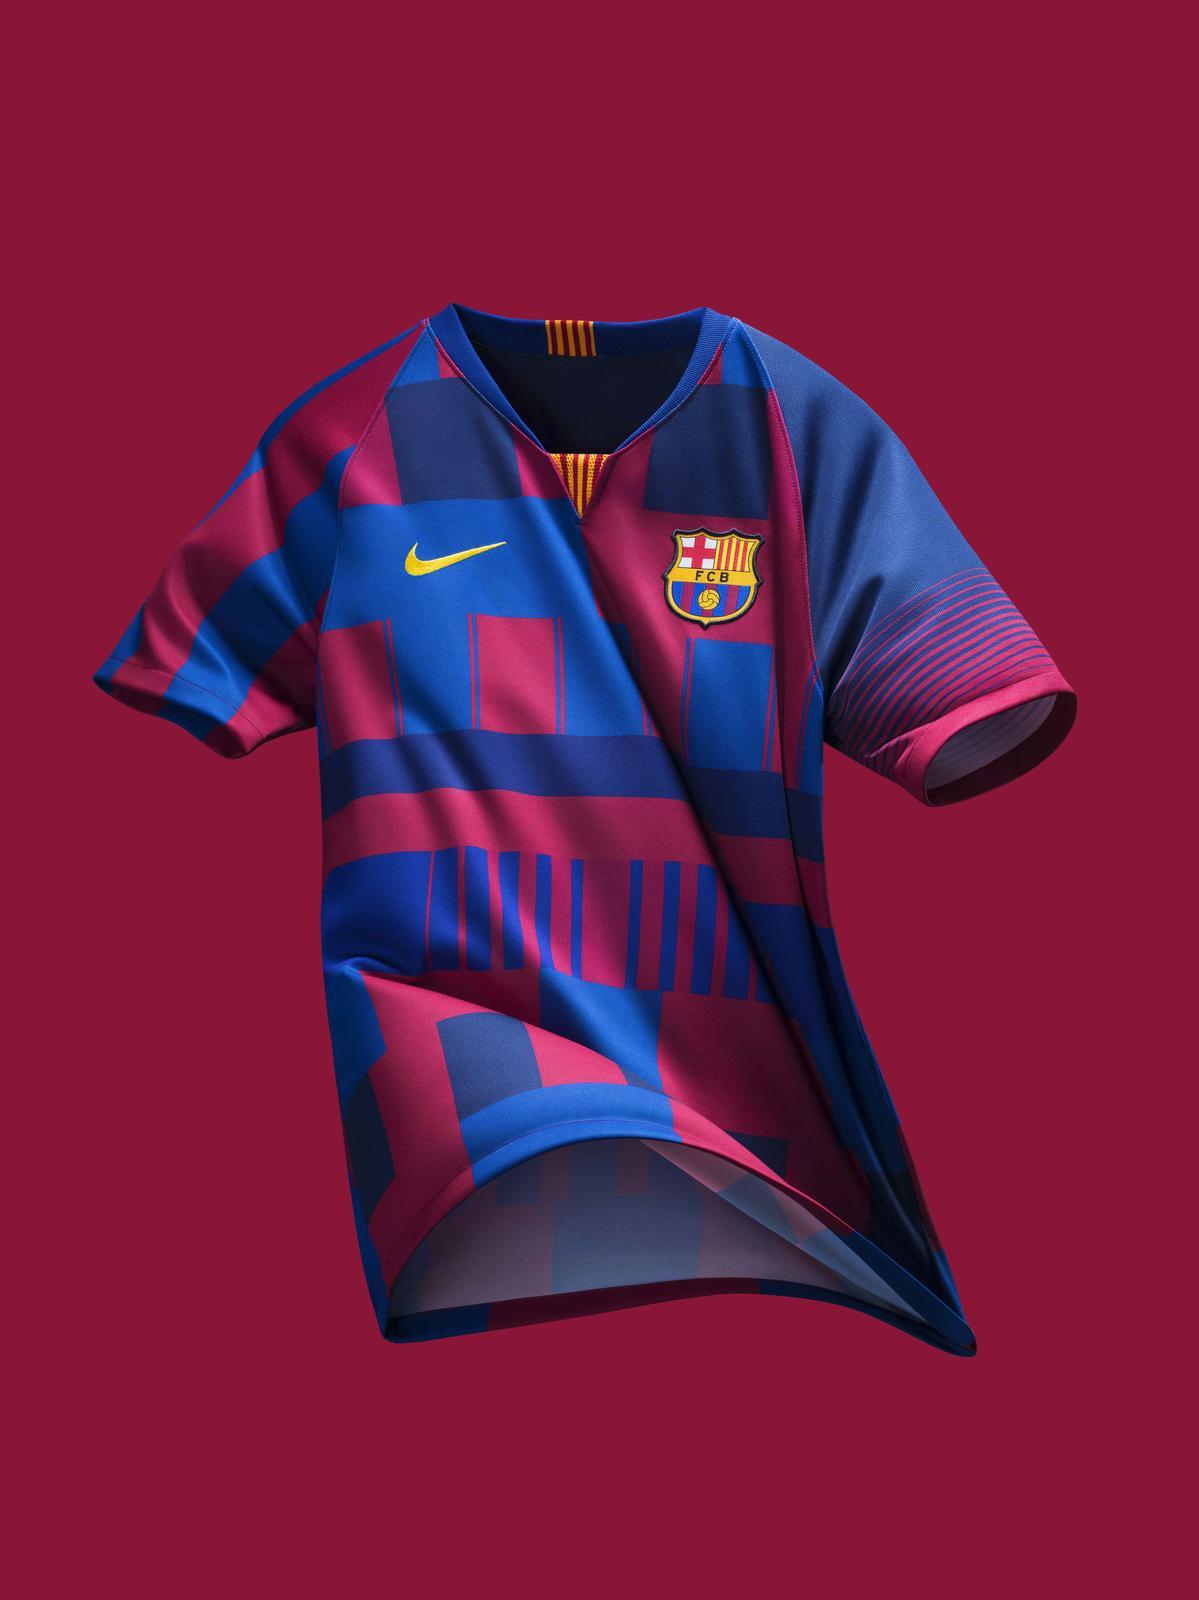 Mixed Red and Black Nike Logo - FC Barcelona What The 20th Anniversary Jersey - Nike News